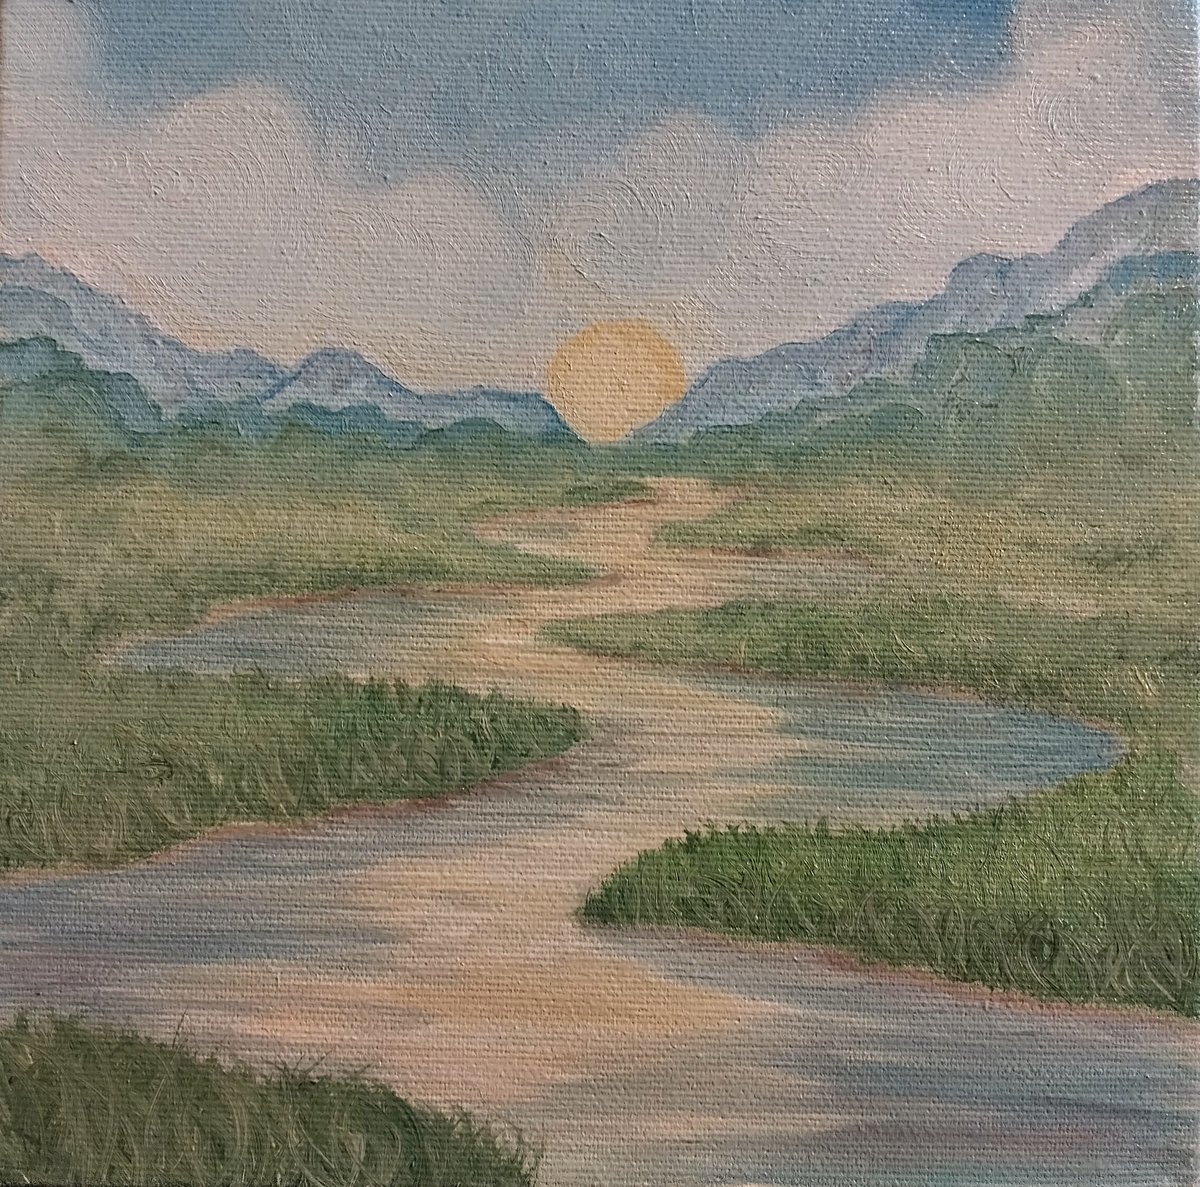 ❤️ The river of dreams
oil on canvas 20x20 cm

🍀 Come into my dream, where time stands still, and our worlds blend into a tale flowing along the river of our dreams.
---

#art #artist #artwork #oilpainting #oiloncanvas #painting #landscapepainting #nature #bulgarianartist